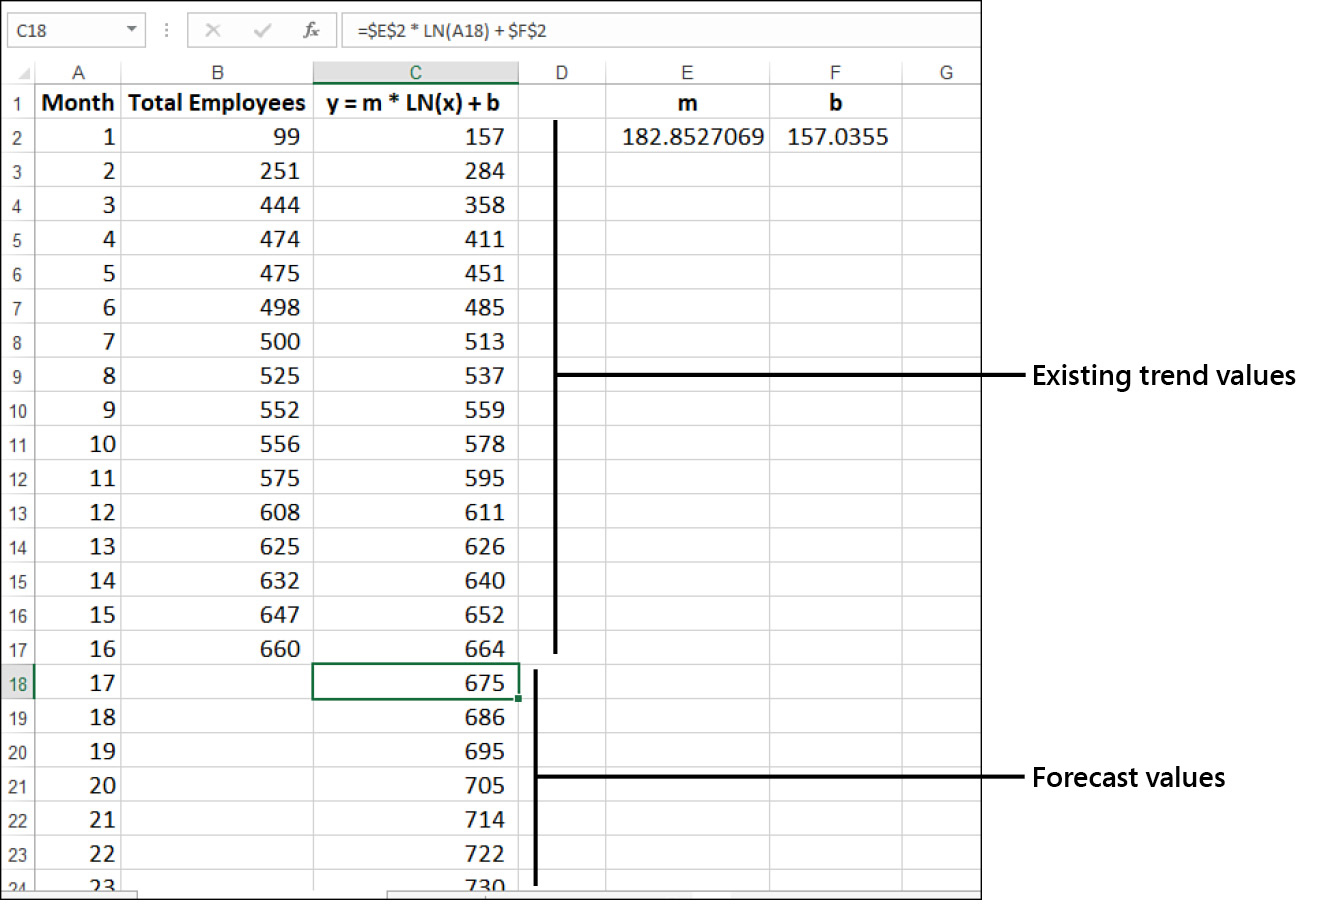 The figure shows an Excel worksheet with a formula in cell C18 that extends a logarithmic trend.